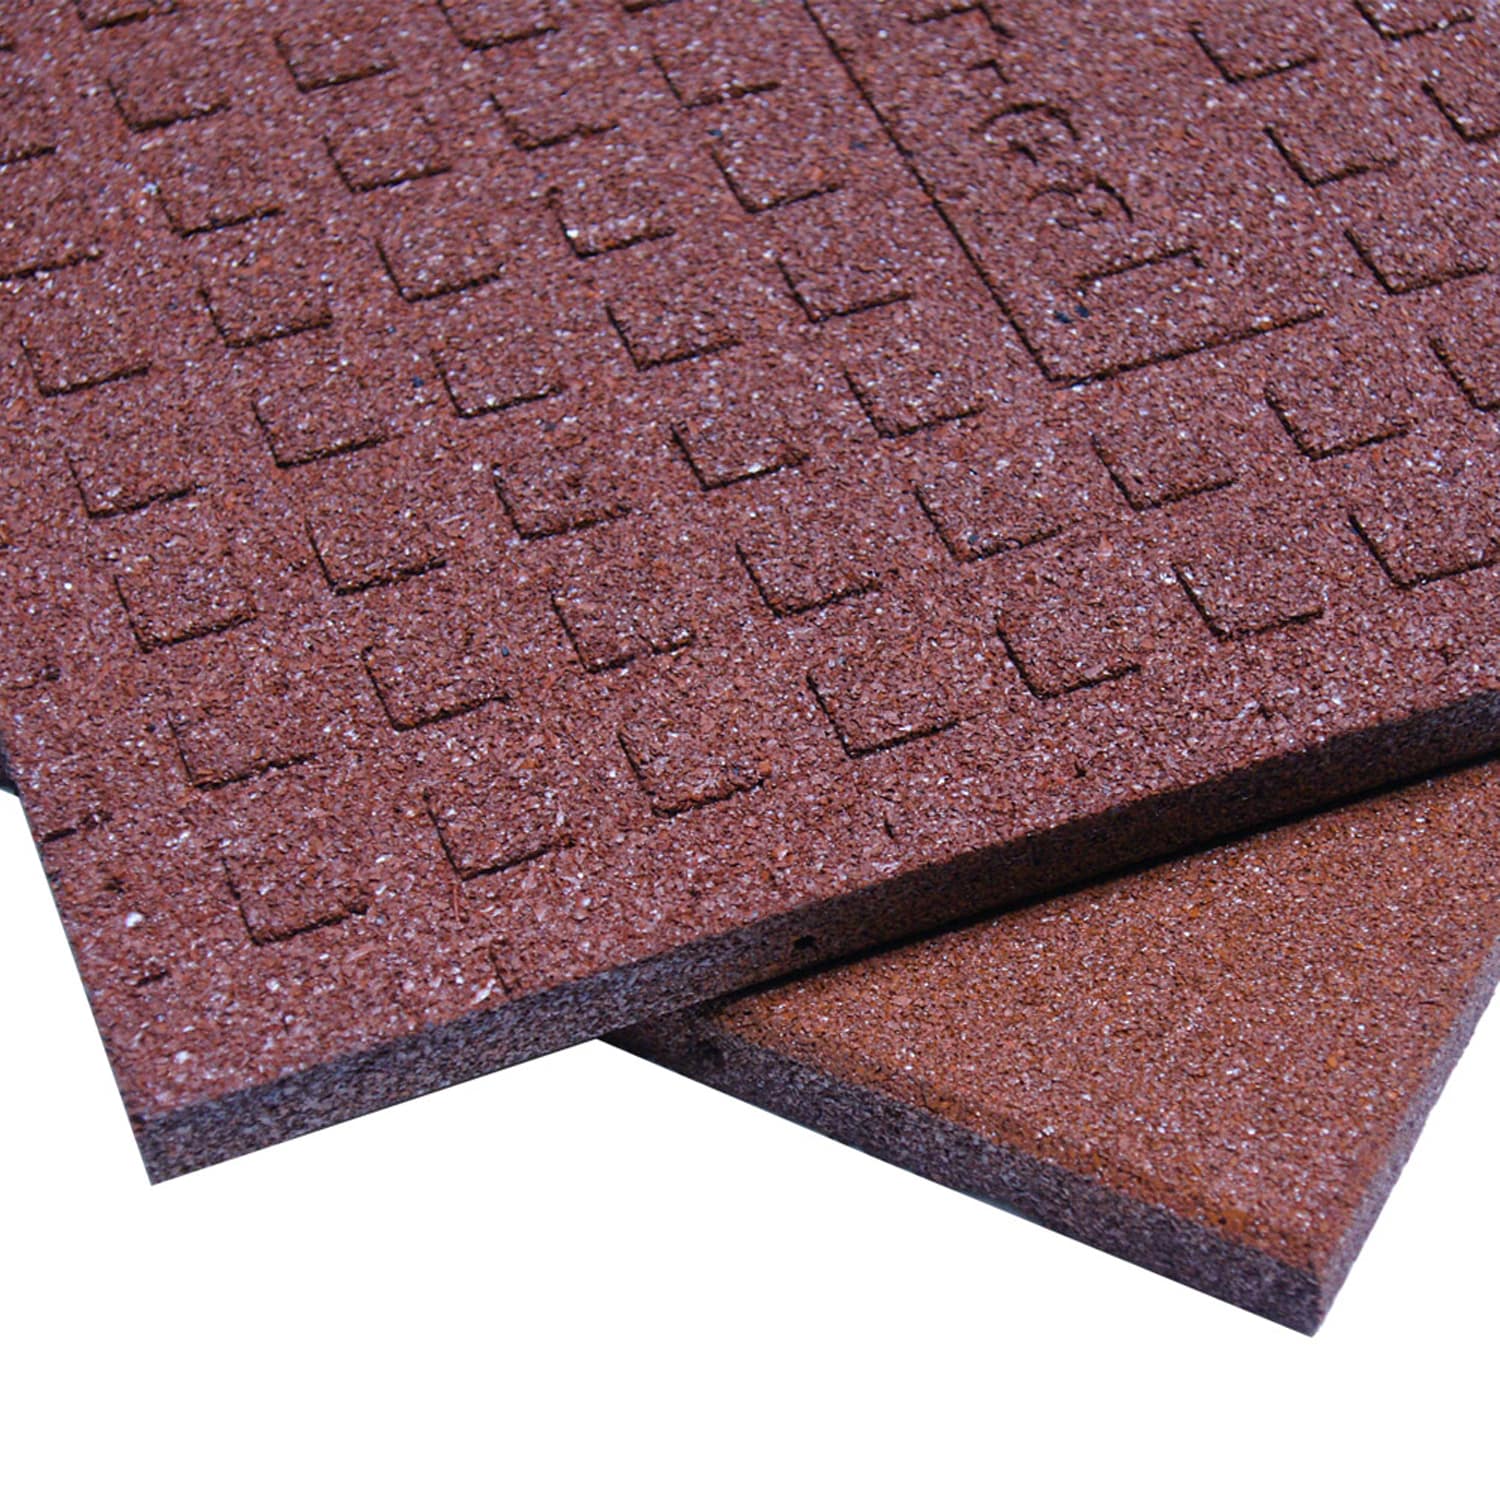 RevTime Easy-DIY Ultra Thick Interlocking Outdoor Rubber Tiles 20 x 20 x  1-3/4” (500x500x45mm) (Red-Terra Cotta) (2pcs)